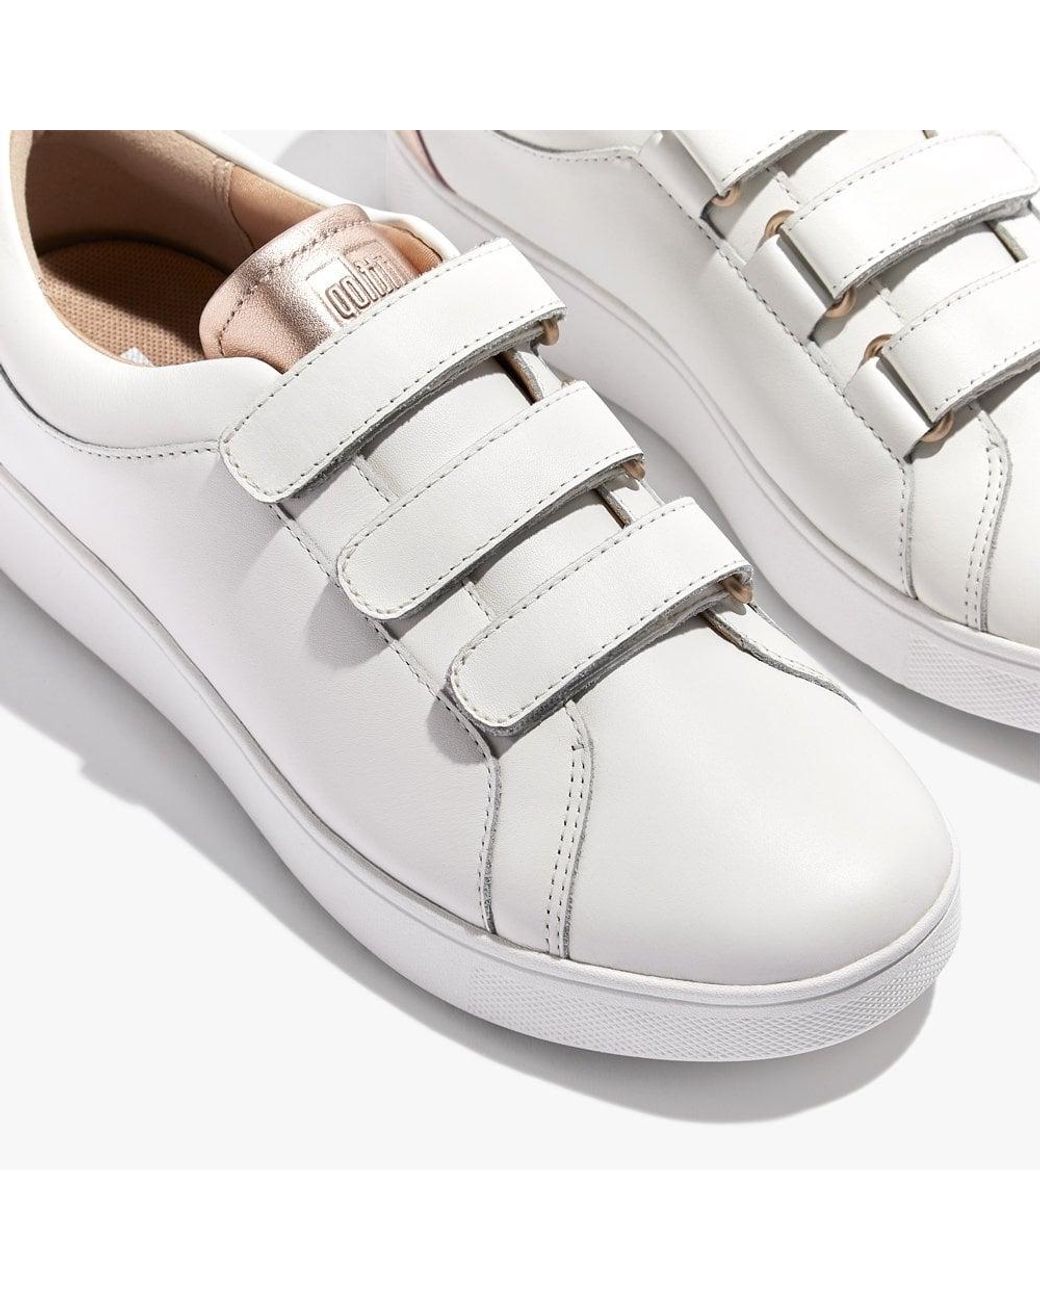 FitFlop - Sneakers you need: The ultimate in casual cool, from sleek  silhouettes to bold styles https://fitflop.co/sneakers-you-need | Facebook